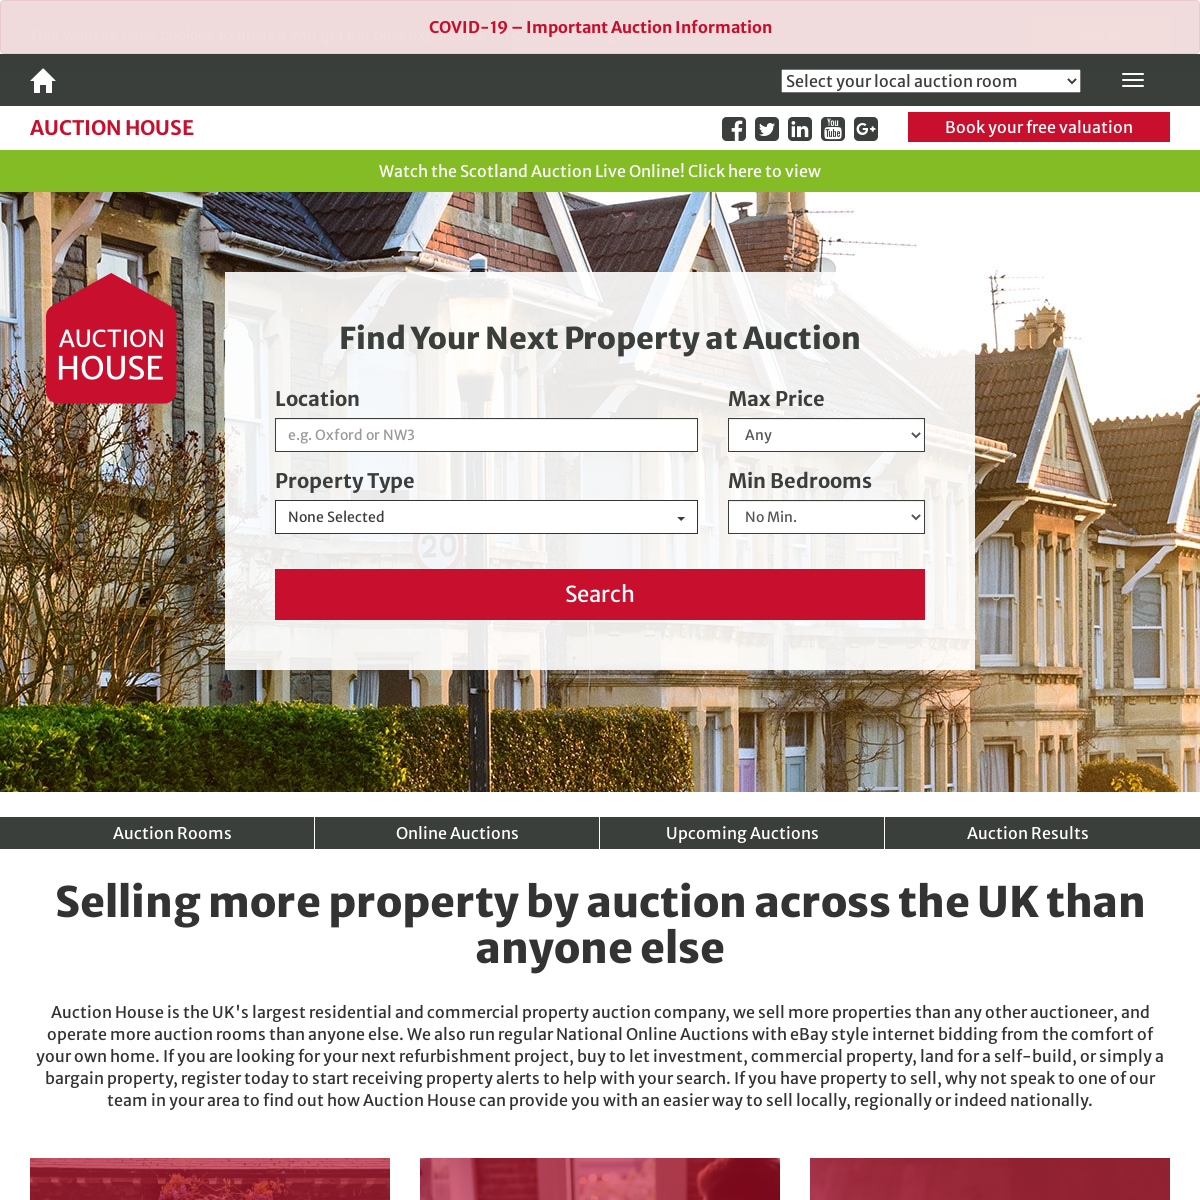 A complete backup of auctionhouse.co.uk